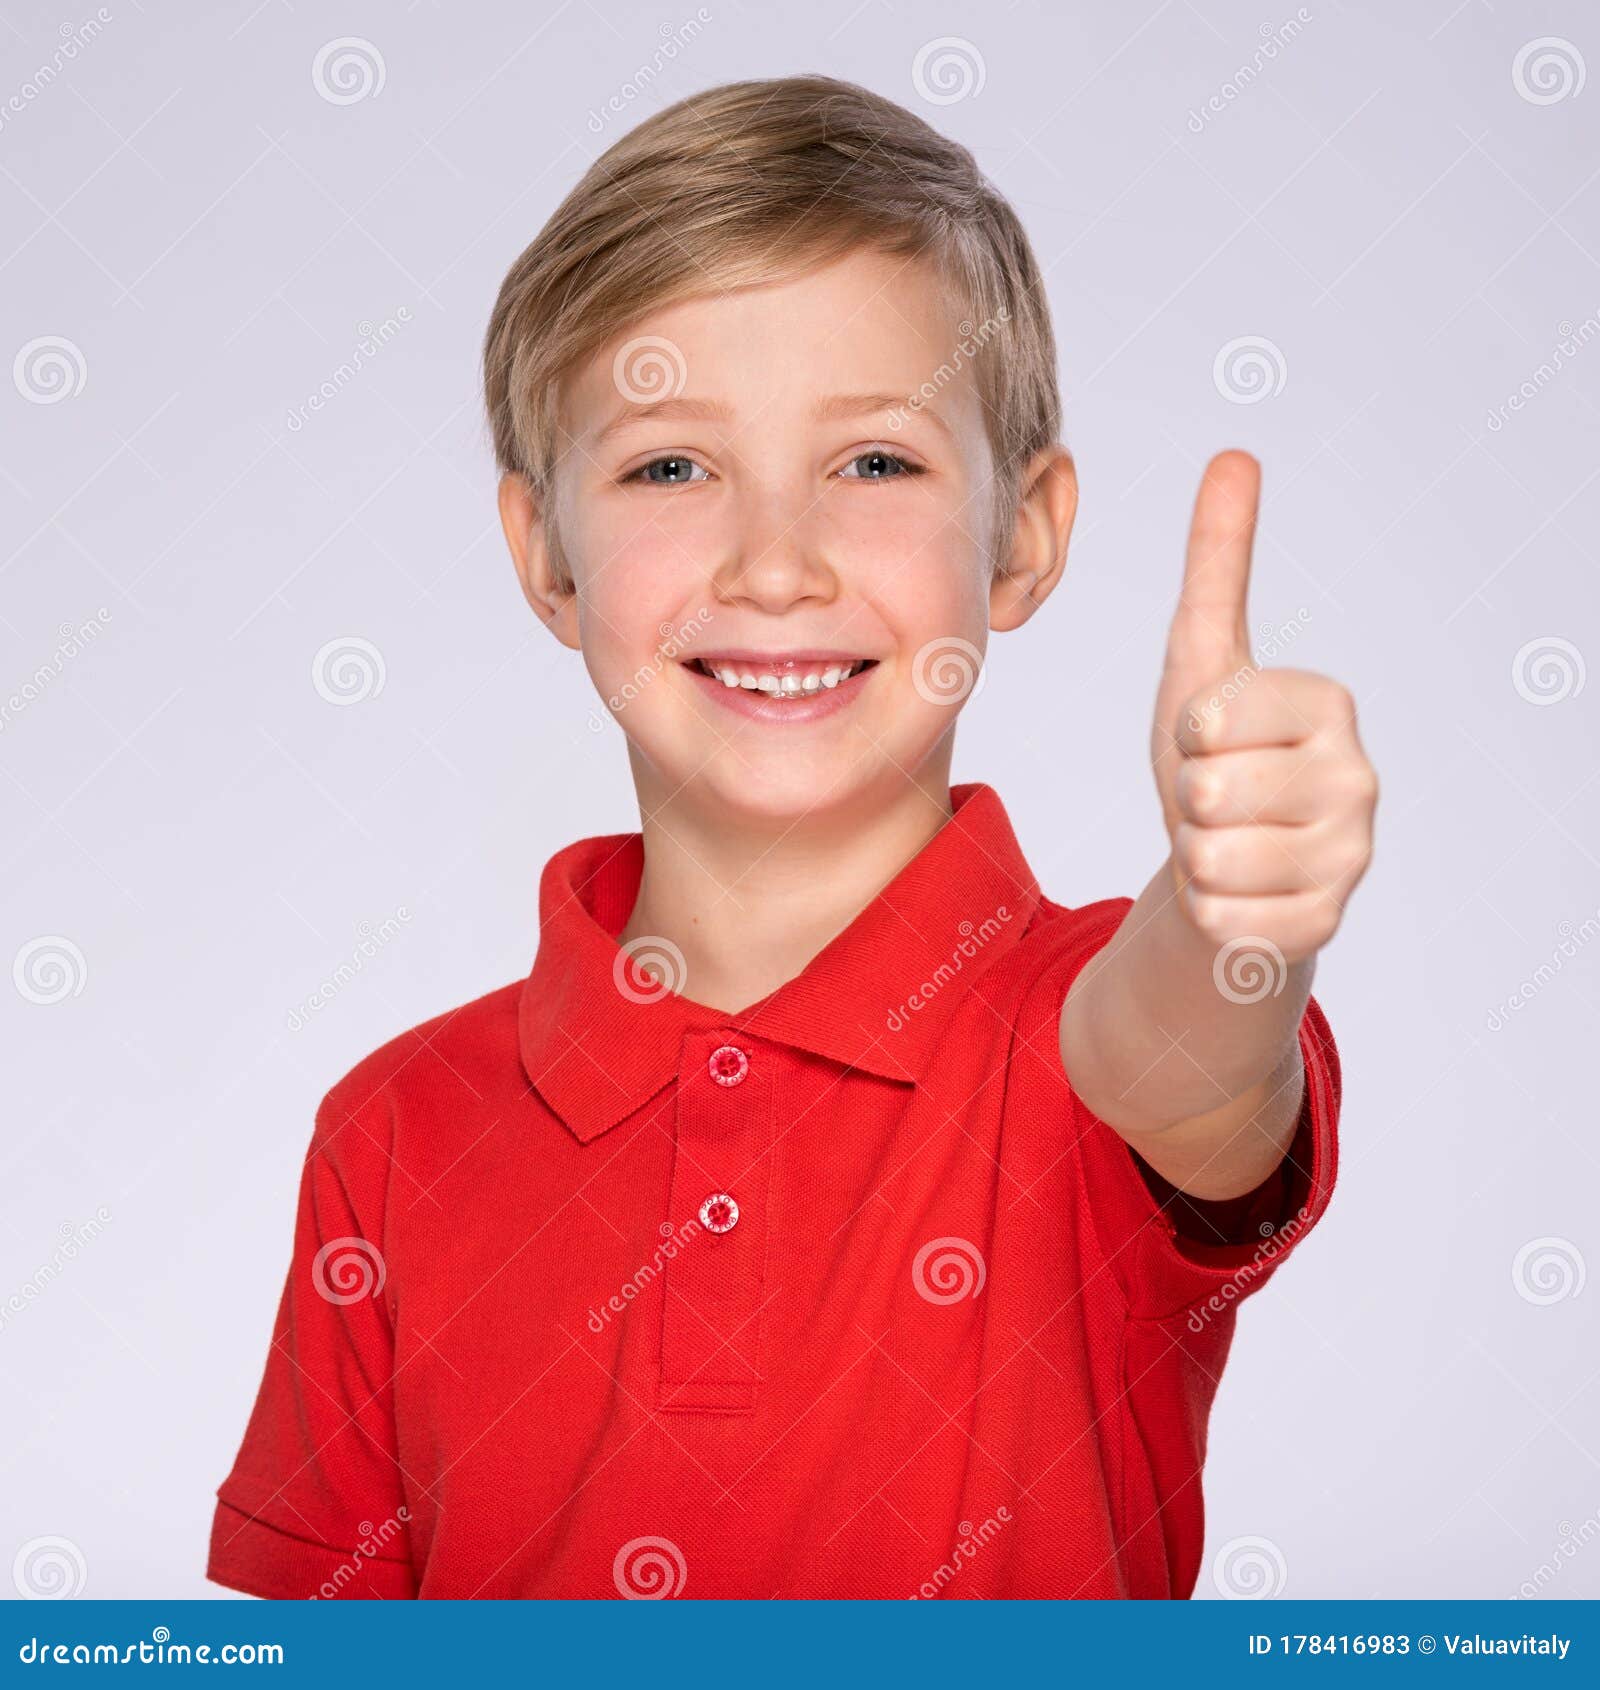 Portrait Of Happy Boy Showing Thumbs Up Gesture Isolated Over White